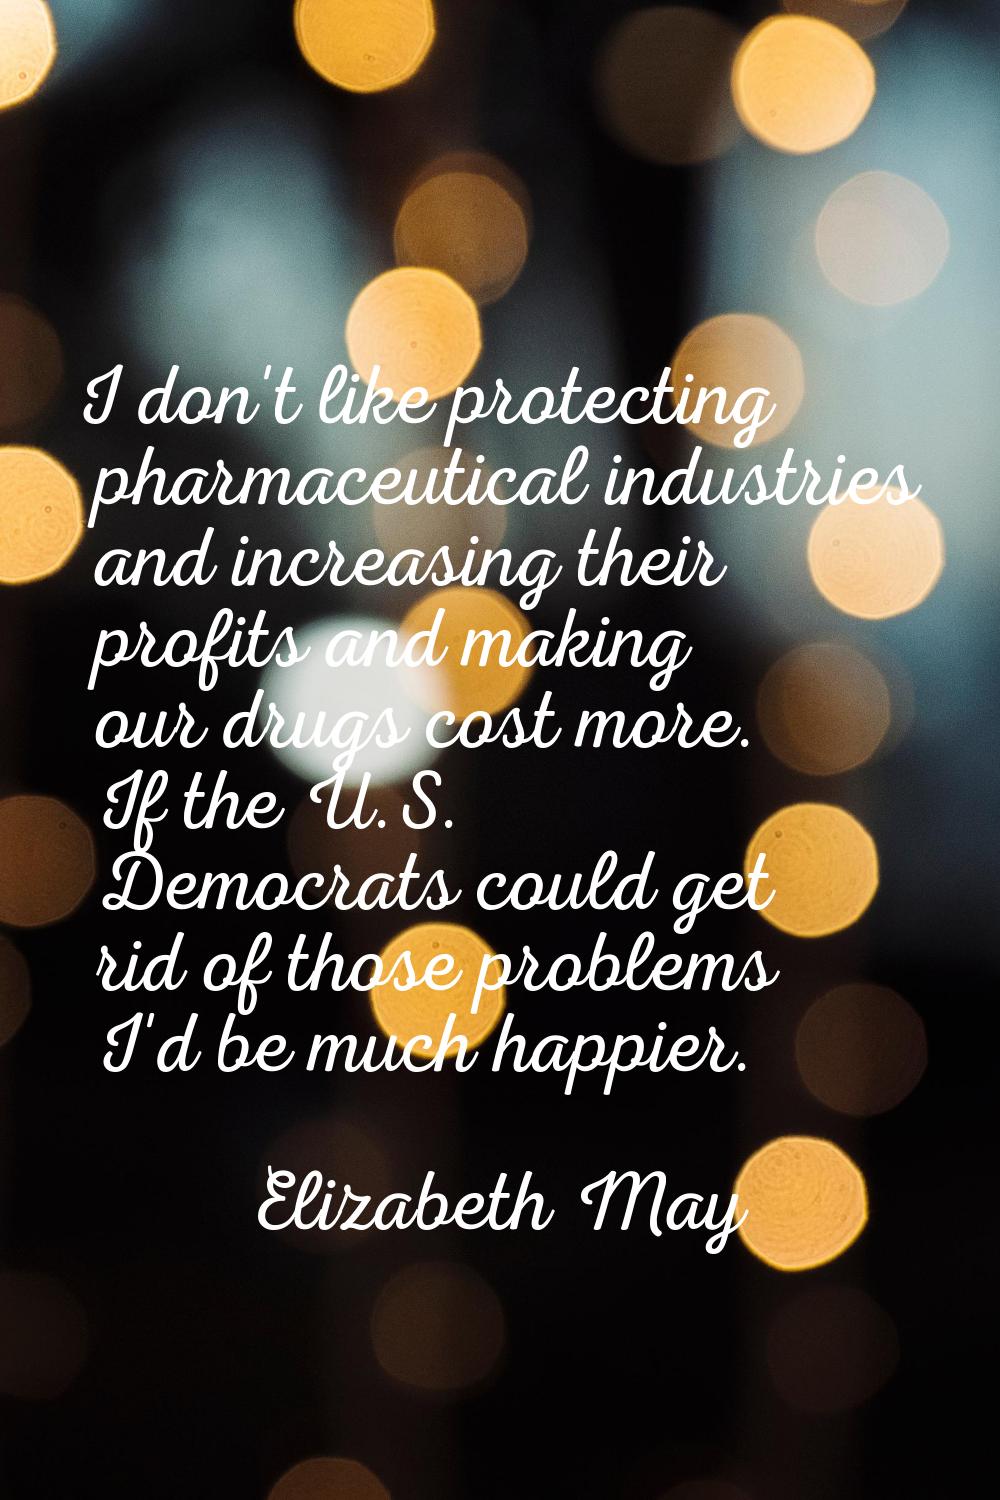 I don't like protecting pharmaceutical industries and increasing their profits and making our drugs